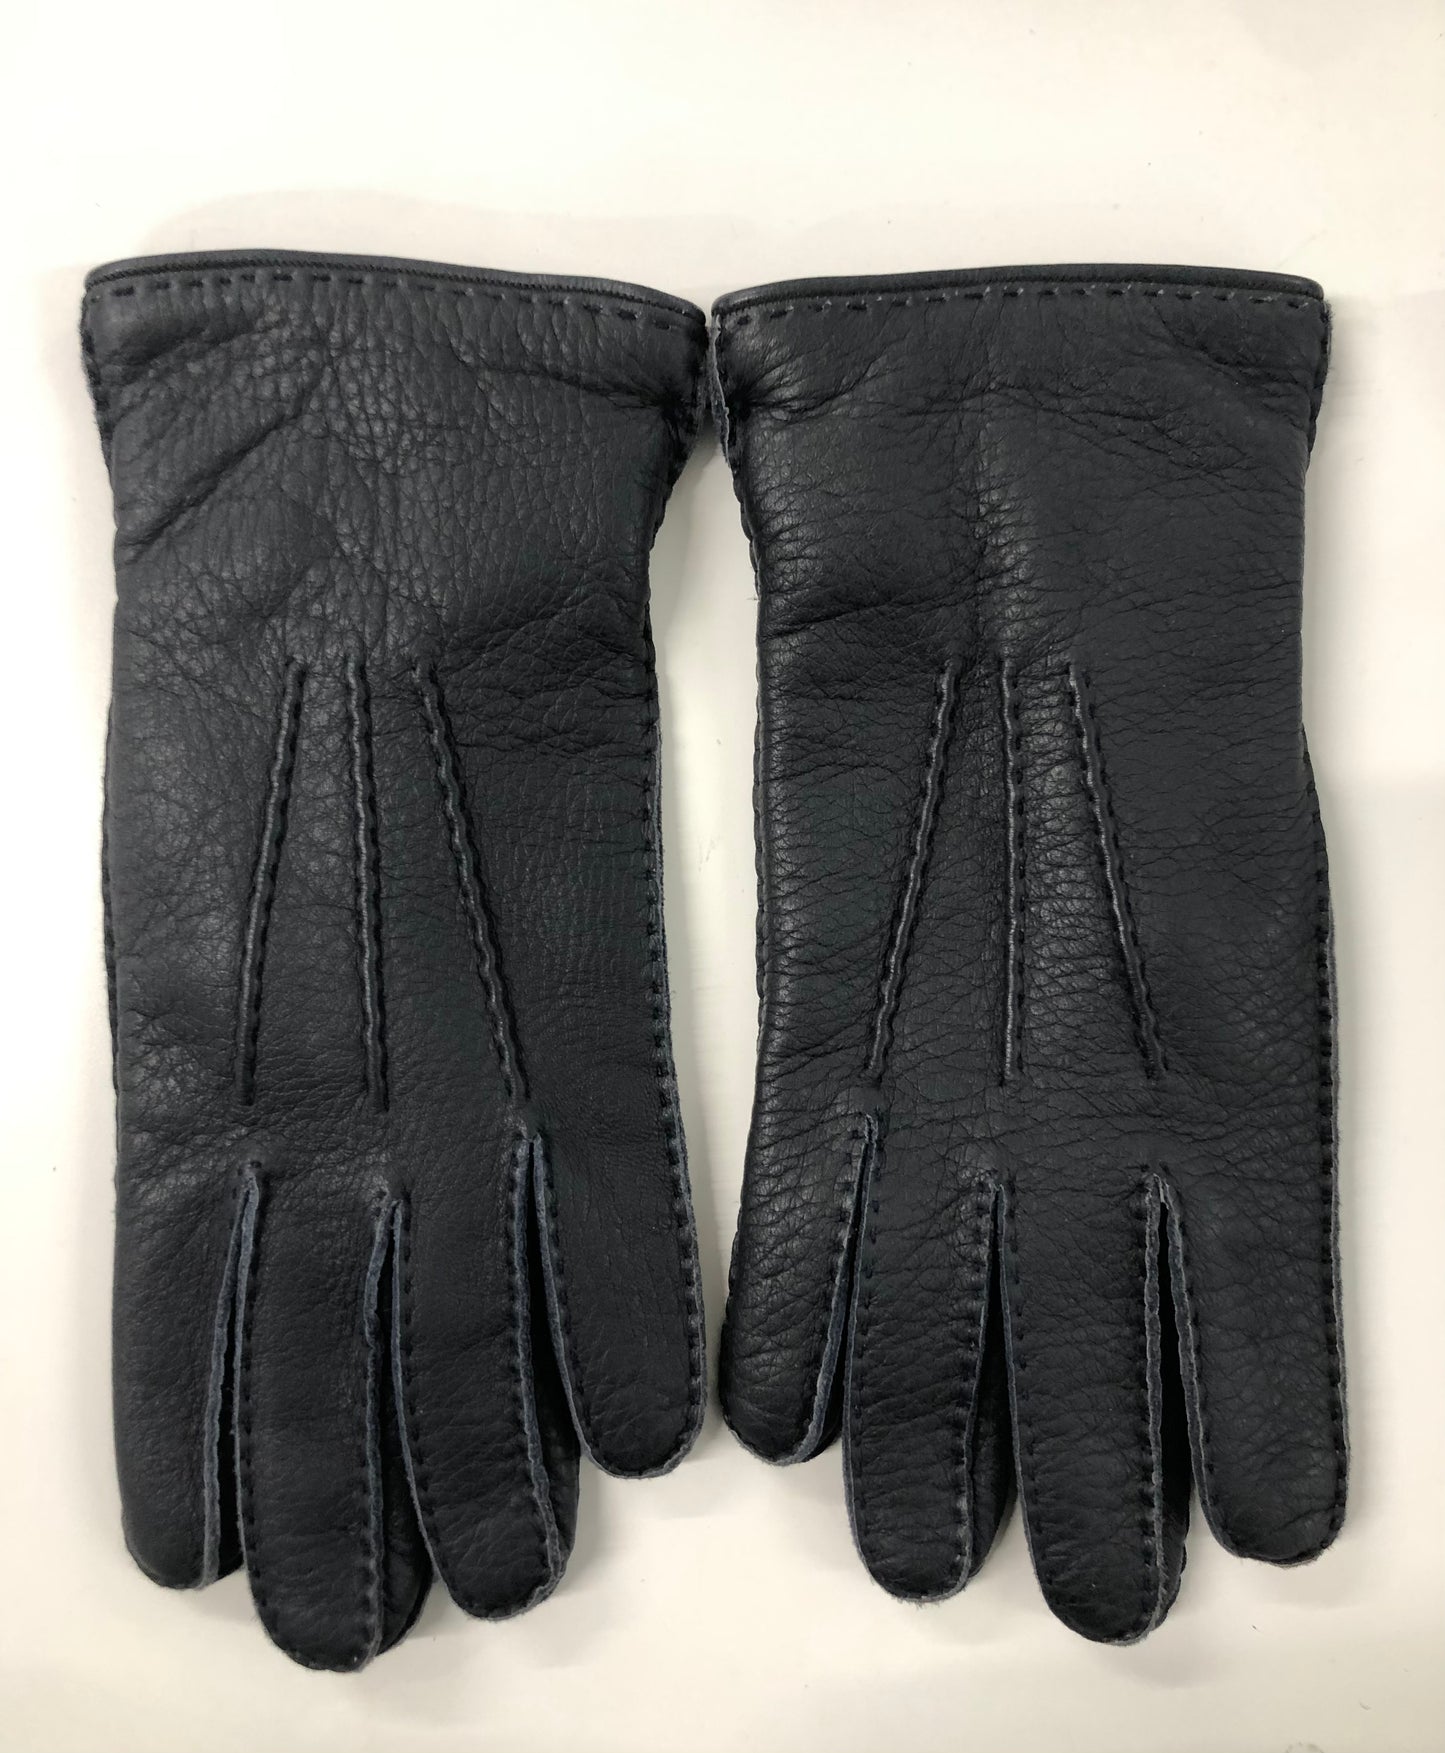 Hunting Gloves-Navy Leather